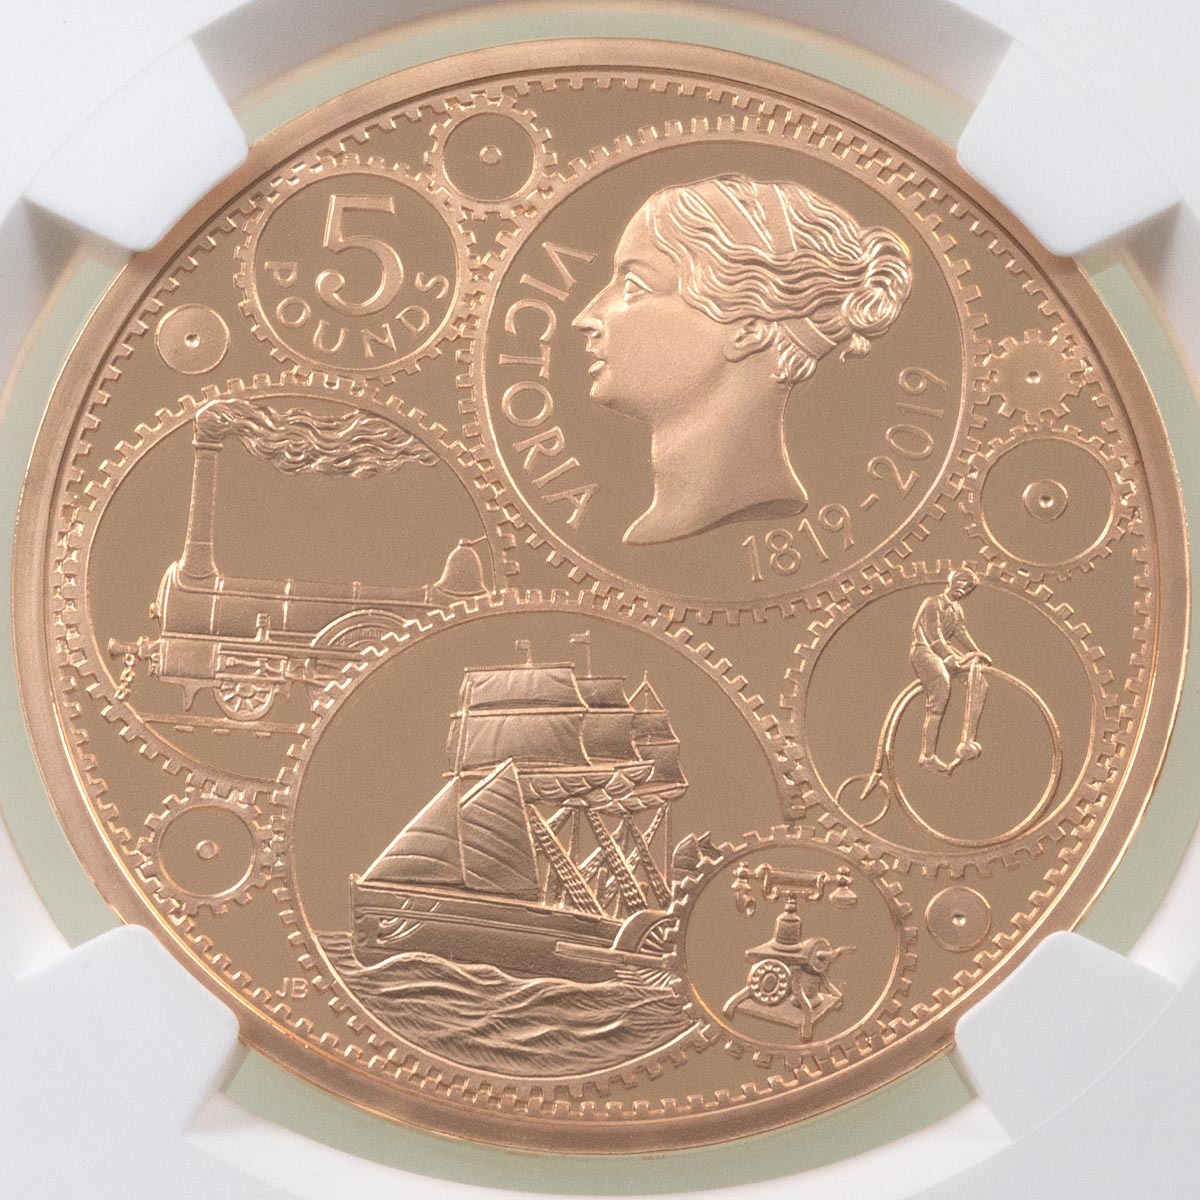 UK19VCGP 2019 Queen Victoria 200th Anniversary Five Pound Crown Gold Proof Coin NGC Graded PF 70 Ultra Cameo Reverse